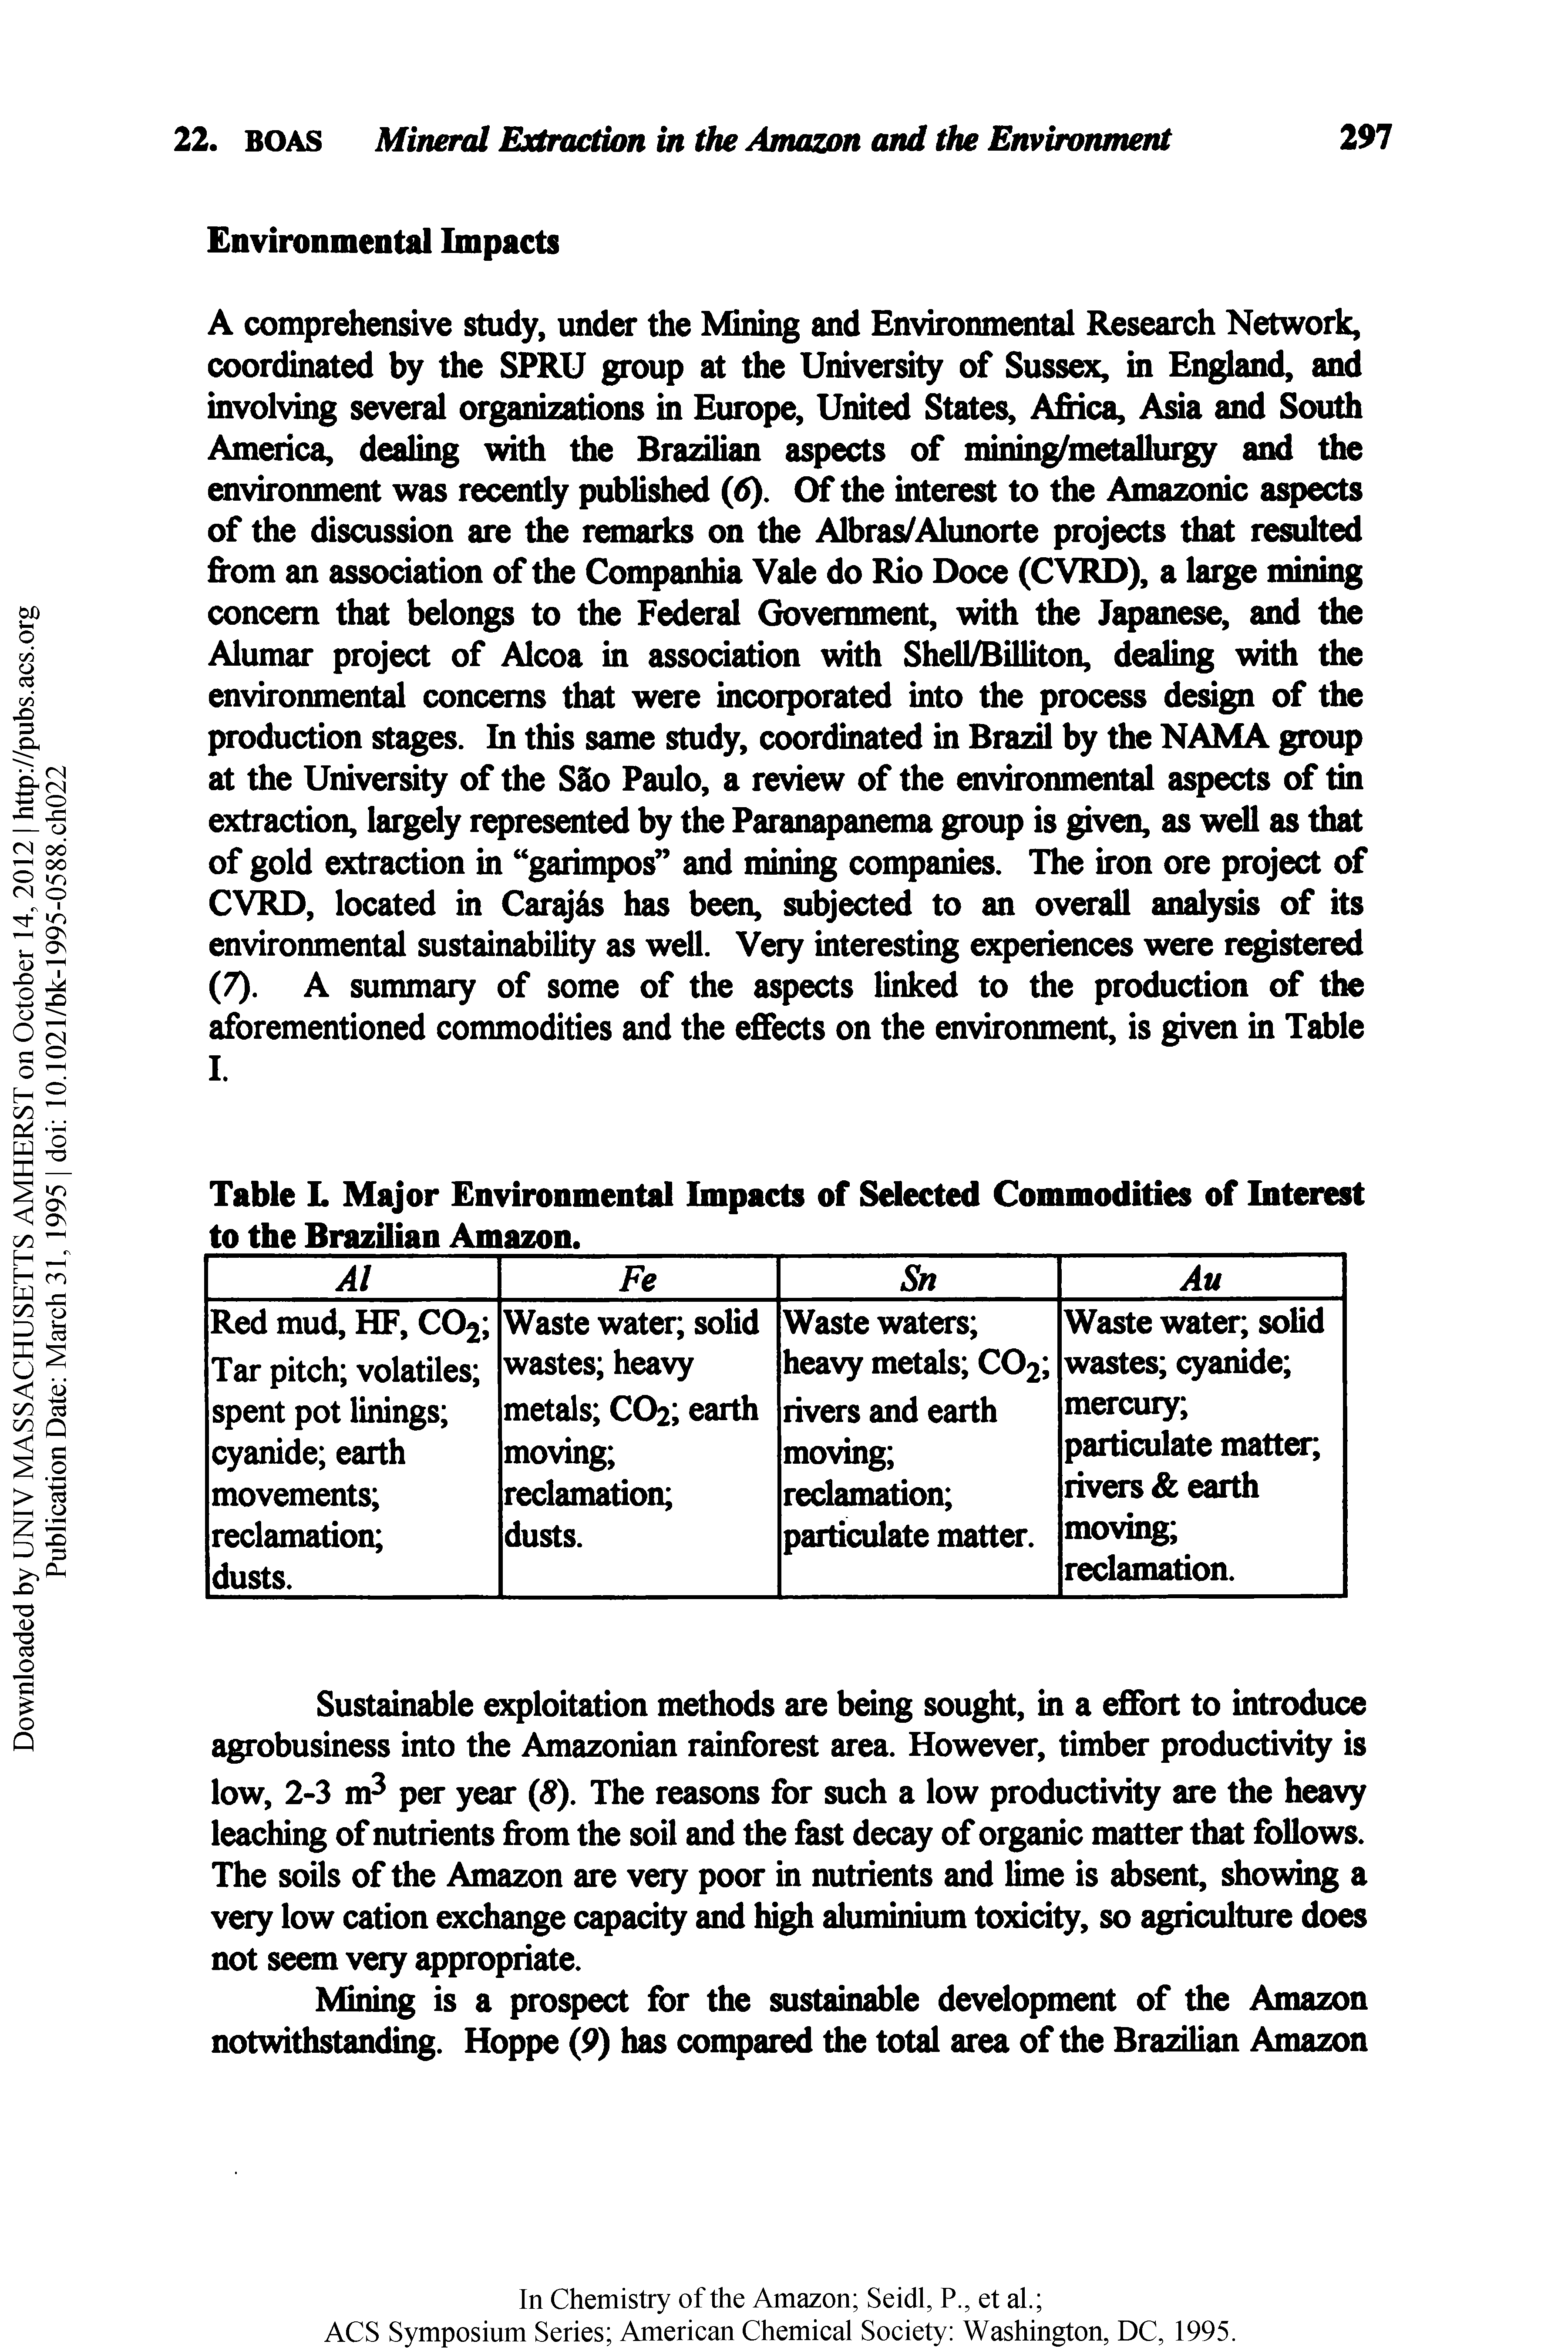 Table L Major Environmental Impacts of Selected Commodities of Interest to the Brazilian Amazon.